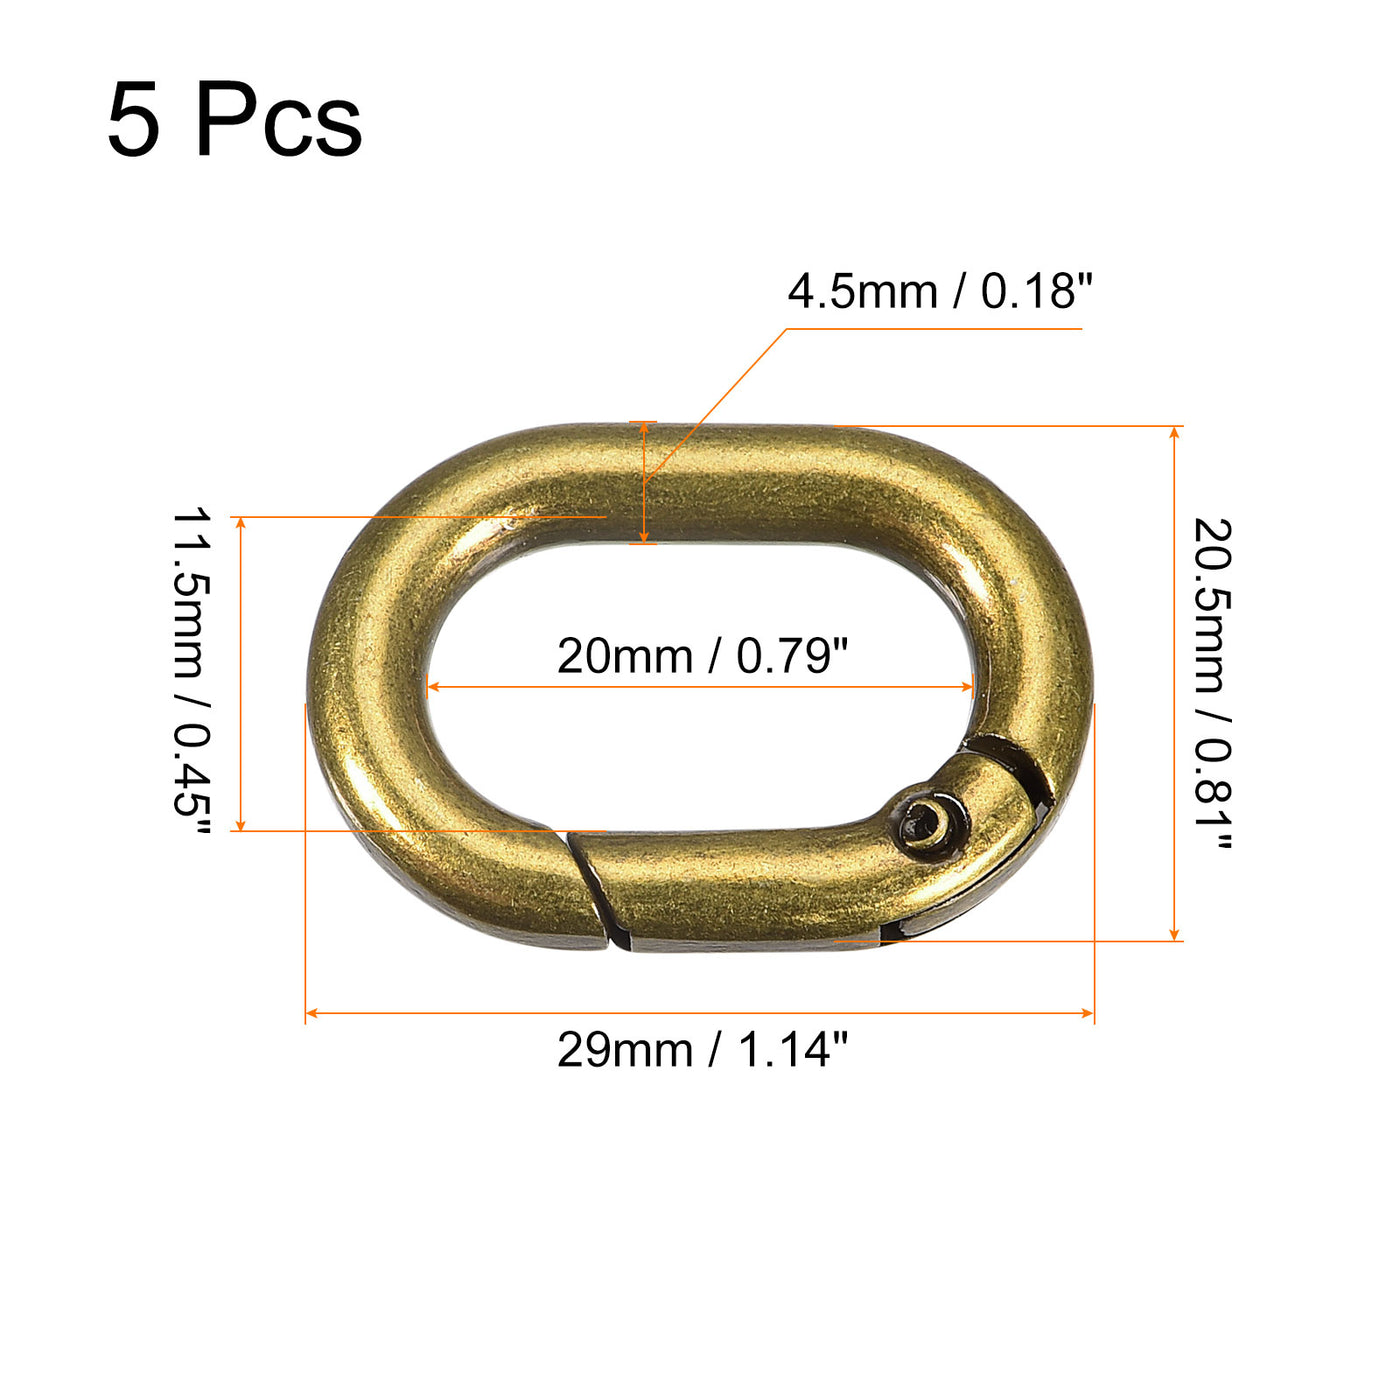 uxcell Uxcell 1.14" Spring Oval Ring Snap Clip Trigger for Bag Purse Keychain, 5Pcs Brass